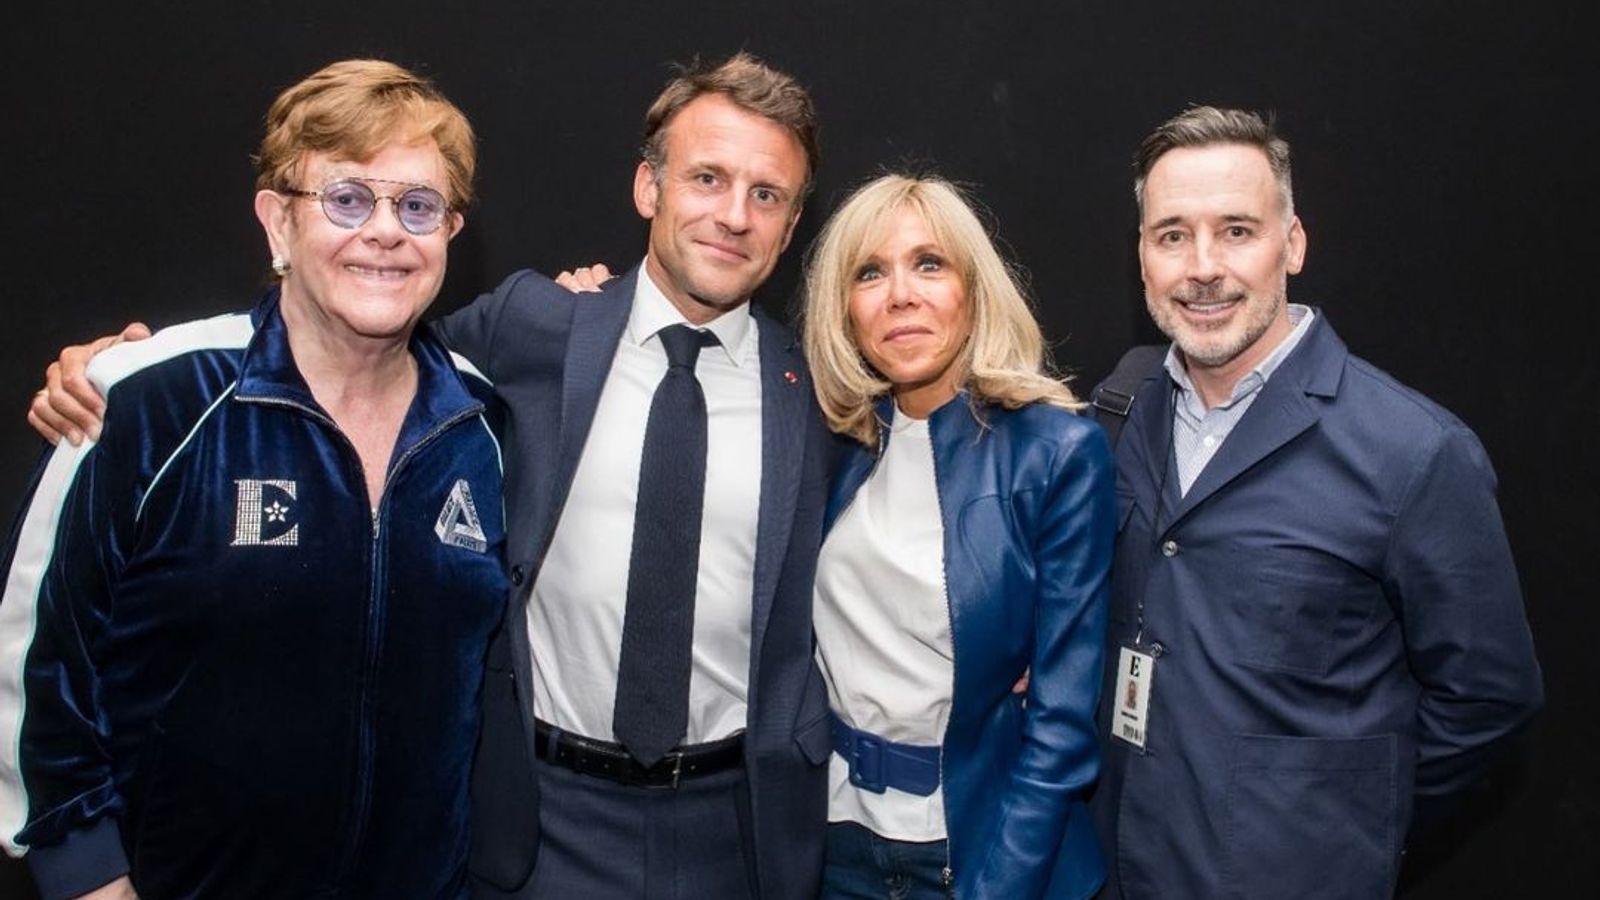 Emmanuel Macron urges parents to keep teenagers indoors - as he faces backlash over attending Elton John gig during riots 